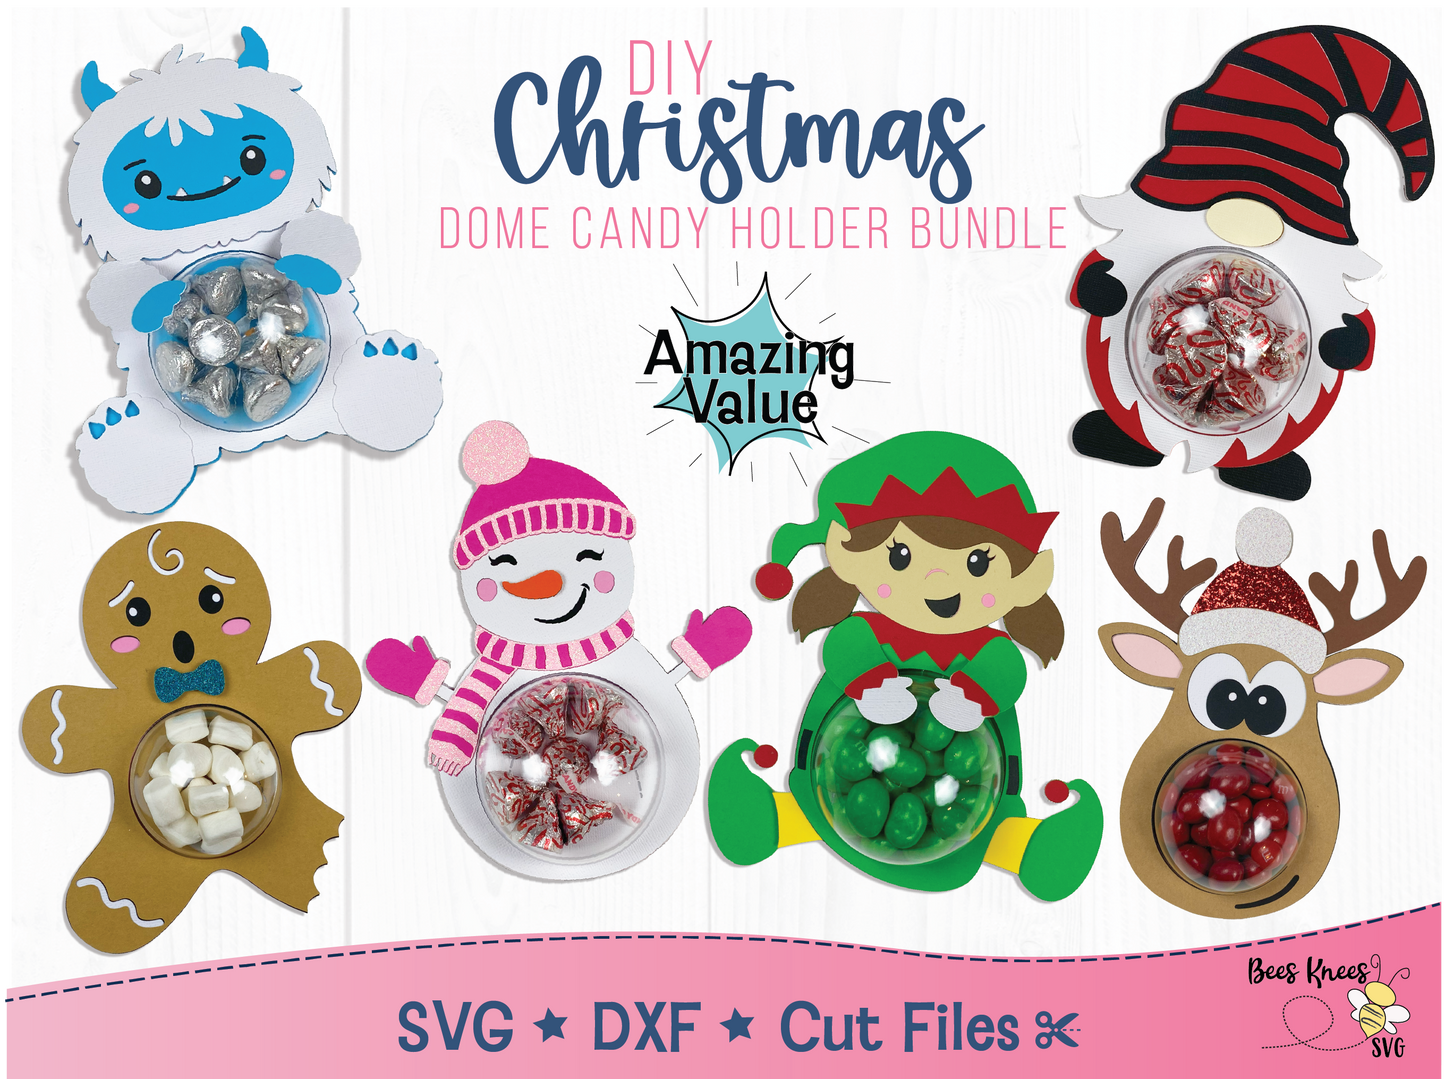 Christmas bundle dome candy holder. Includes gnome, yeti, bitten gingerbread boy, snowman girl, elf girl, reindeer head. Templates for Cricut or Silhouette